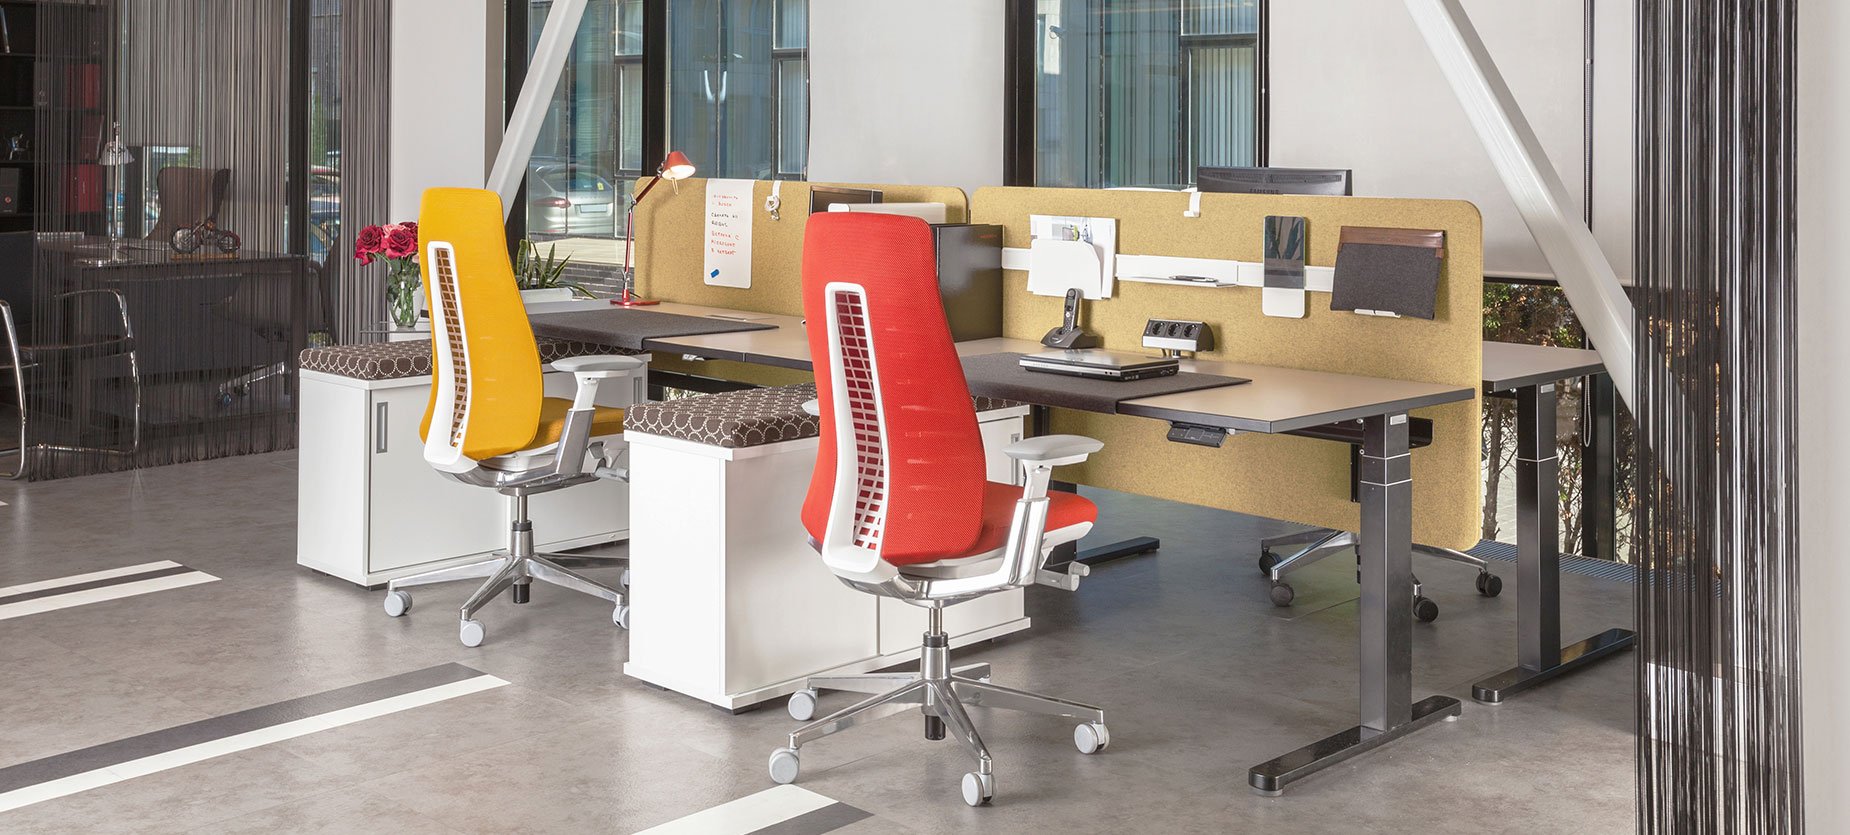 As soon as visitors pass through the Moscow showroom’s lobby, they are welcomed by bright, colourful Fern chairs and YourPlace workstations. The setting instantly demonstrates the ergonomic benefits of height-adjustable desks and the extraordinary comfort of the Fern chair. Storage has cushion toppers that provide temporary seating for collaboration.